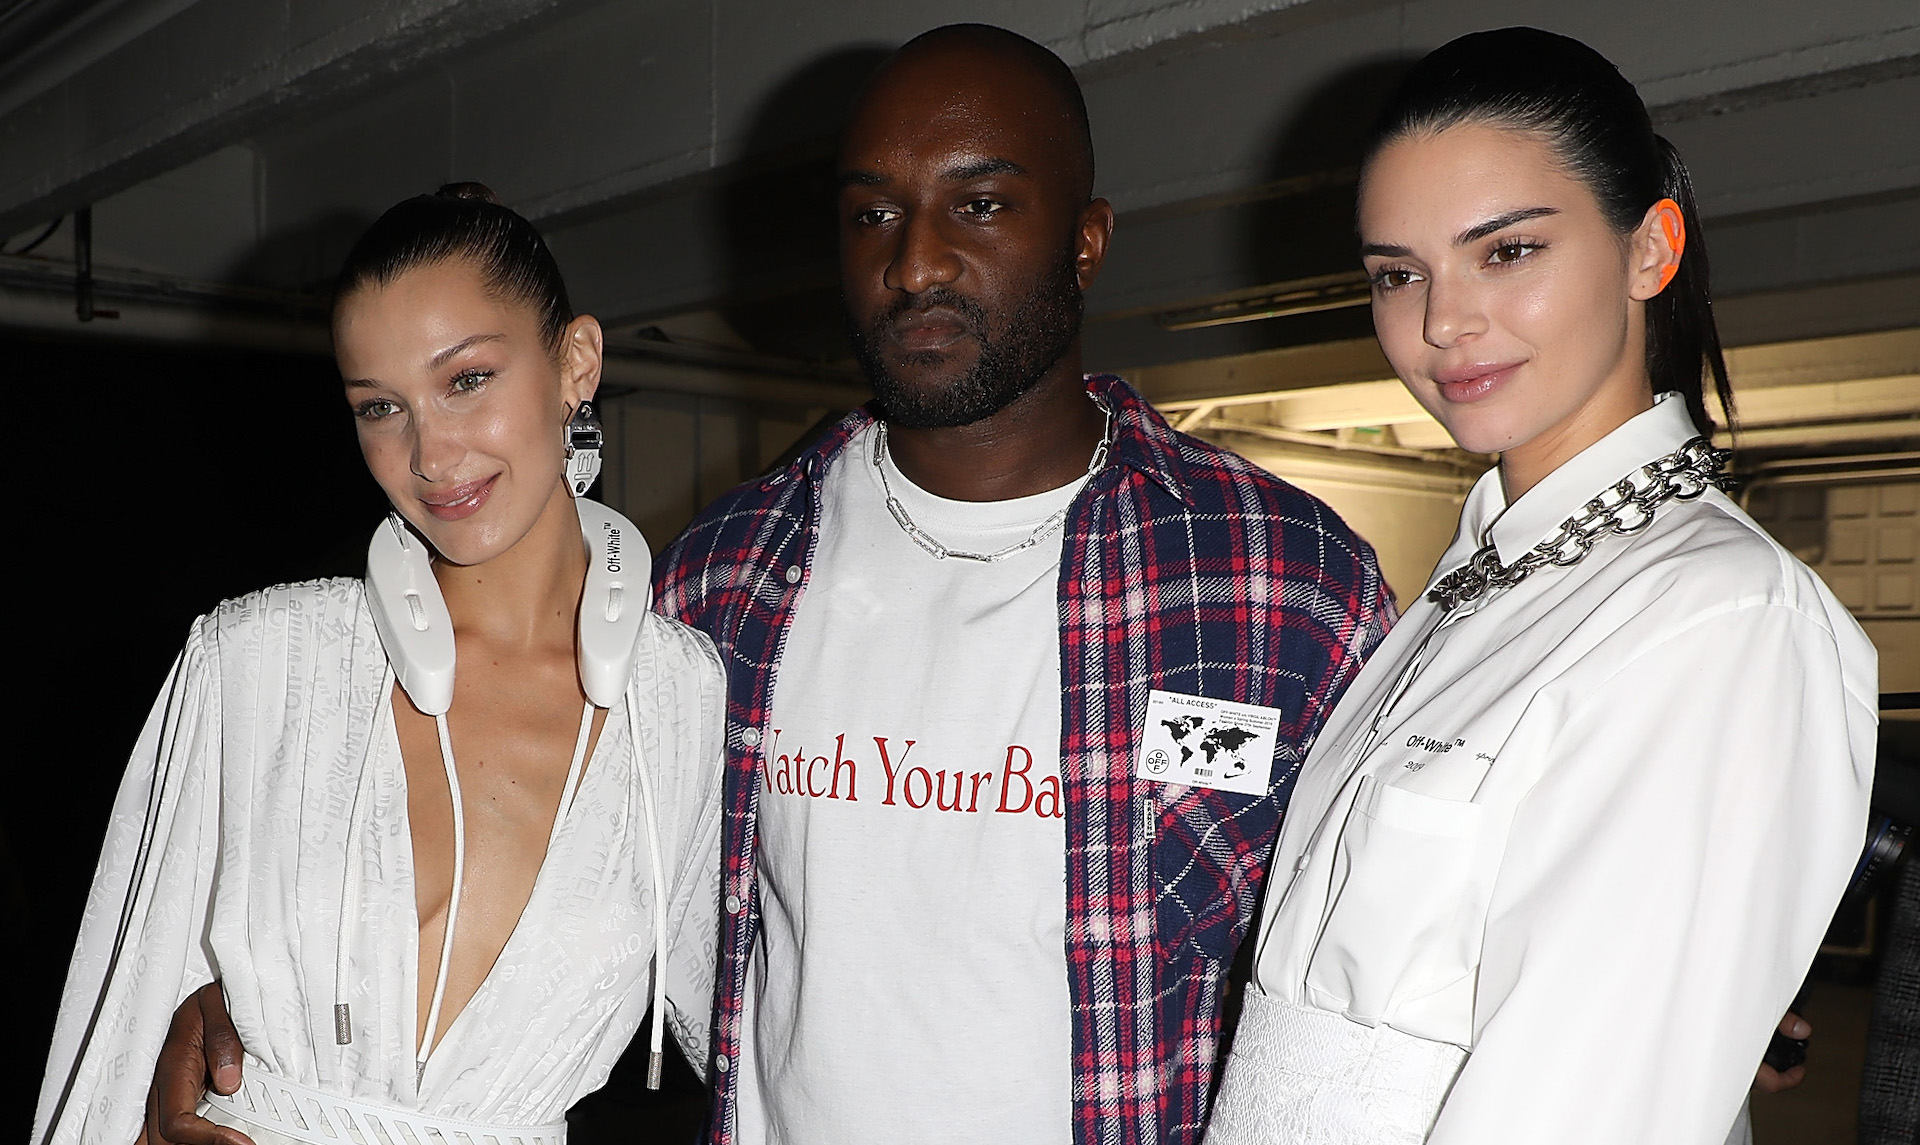 Bella Hadid, BTS, Kendall Jenner & More Pay Tribute to Virgil